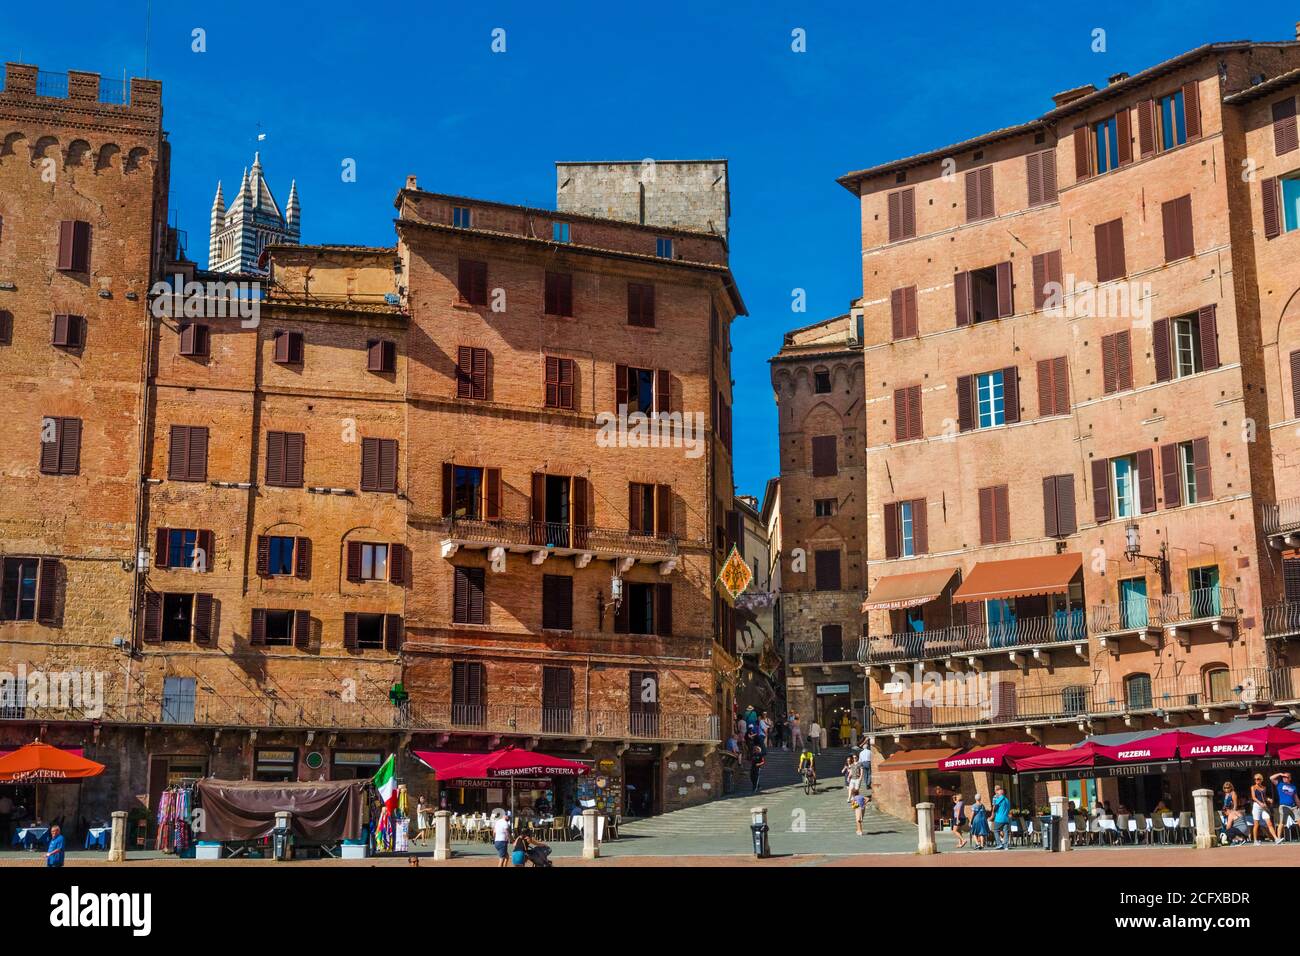 Nice view of various palazzi signorili with a gap caused by the popular Costa Barbieri street; surrounding the historic Piazza del Campo on a sunny... Stock Photo